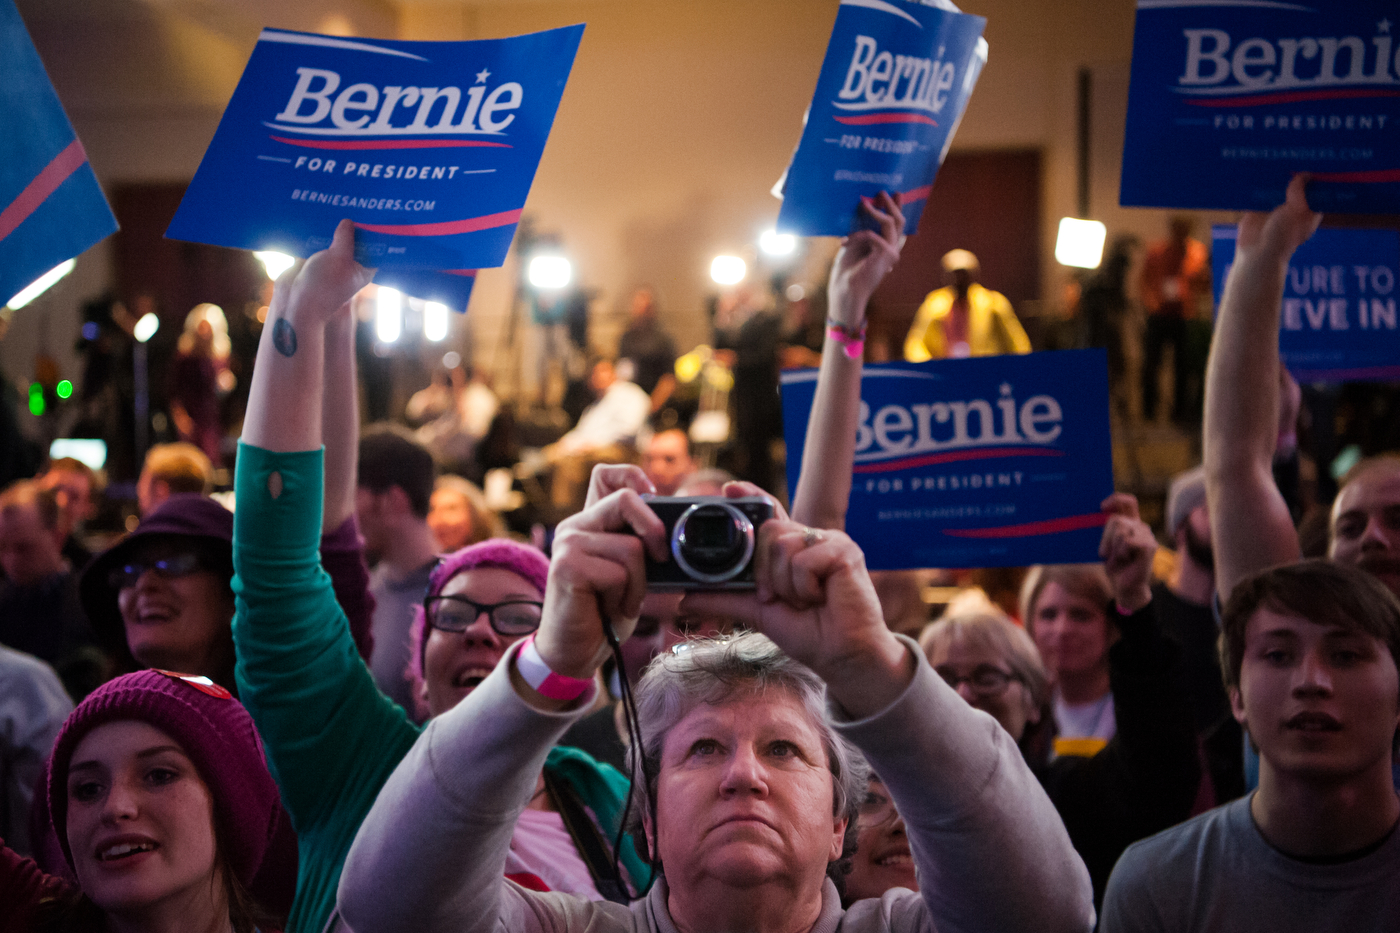  A woman photographs the podium before Democratic U.S. presidential candidate Bernie Sanders' speech a rally on caucus night in Des Moines, Iowa February 1, 2016.  